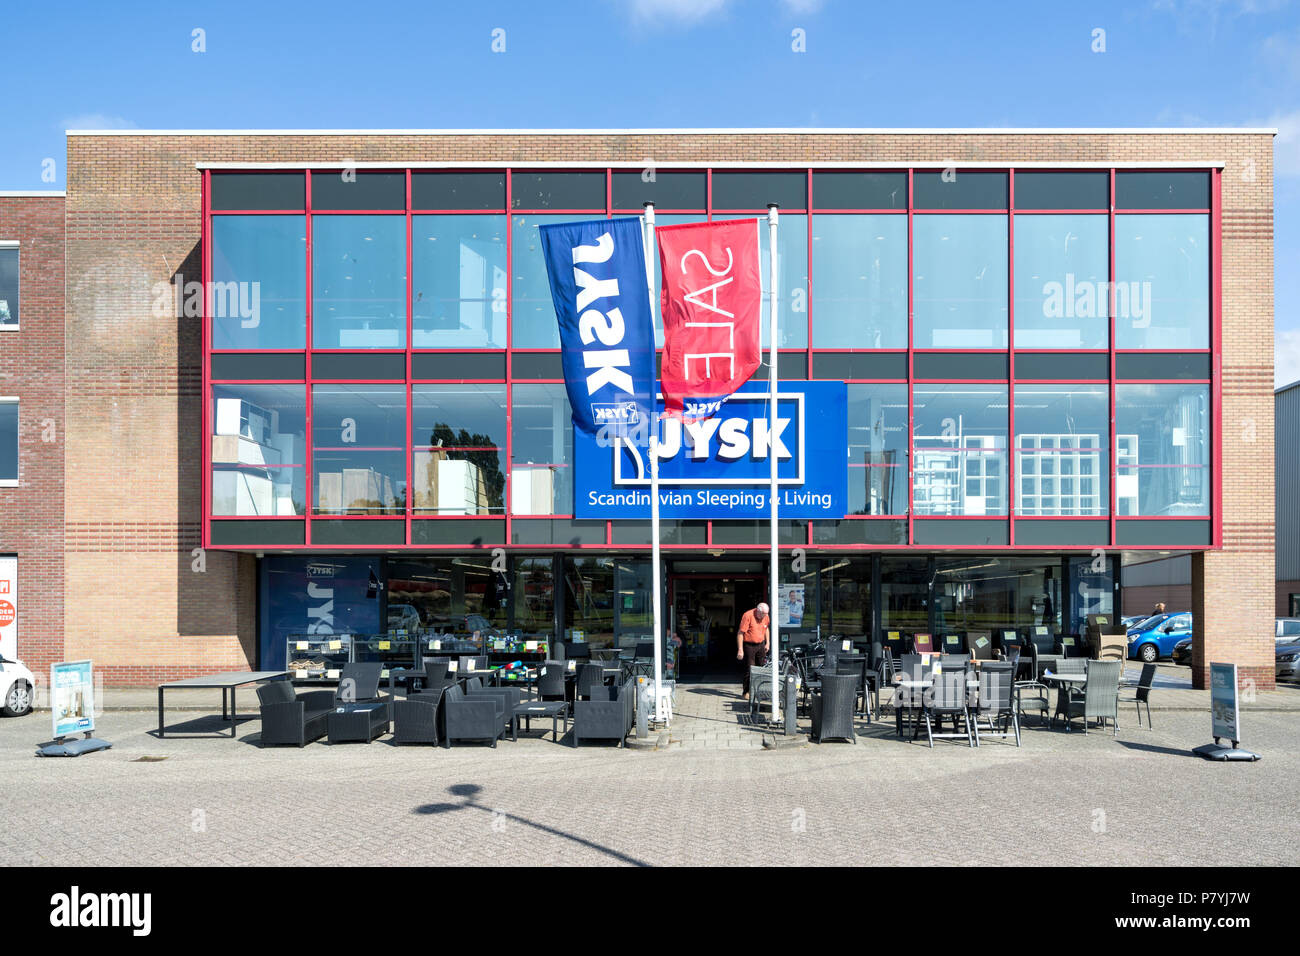 Jysk store in Leiderdorp, the Netherlands. Jysk is a Danish retail chain,  selling household goods such as mattresses, furniture and interior decor  Stock Photo - Alamy